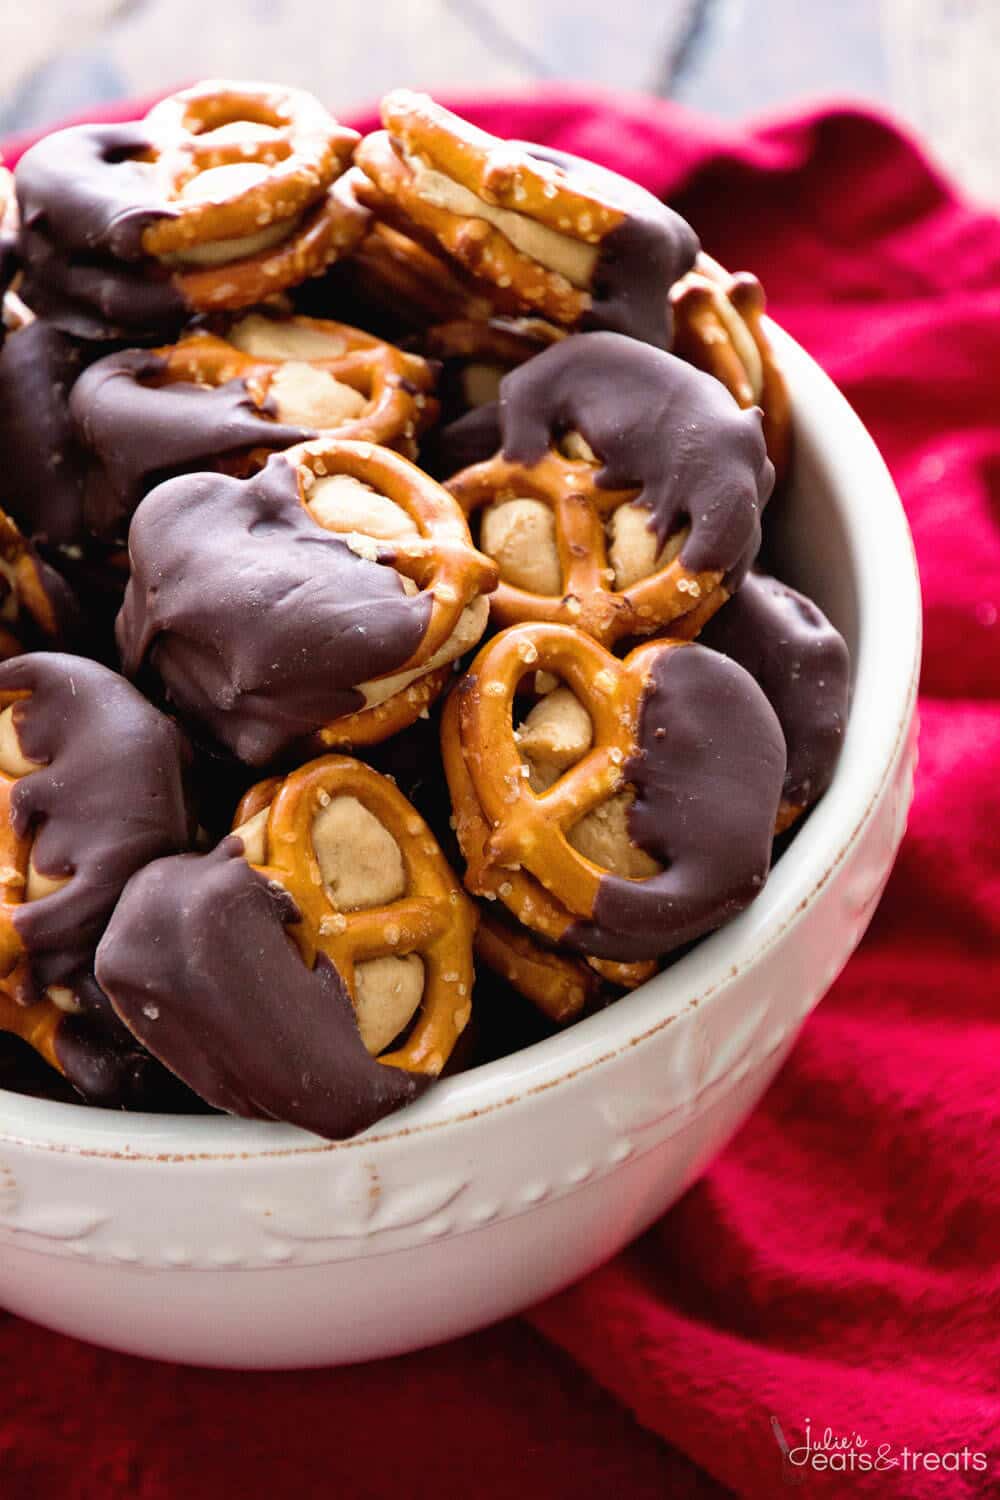 A white bowl full of chocolate covered peanut butter pretzels on a red napkin